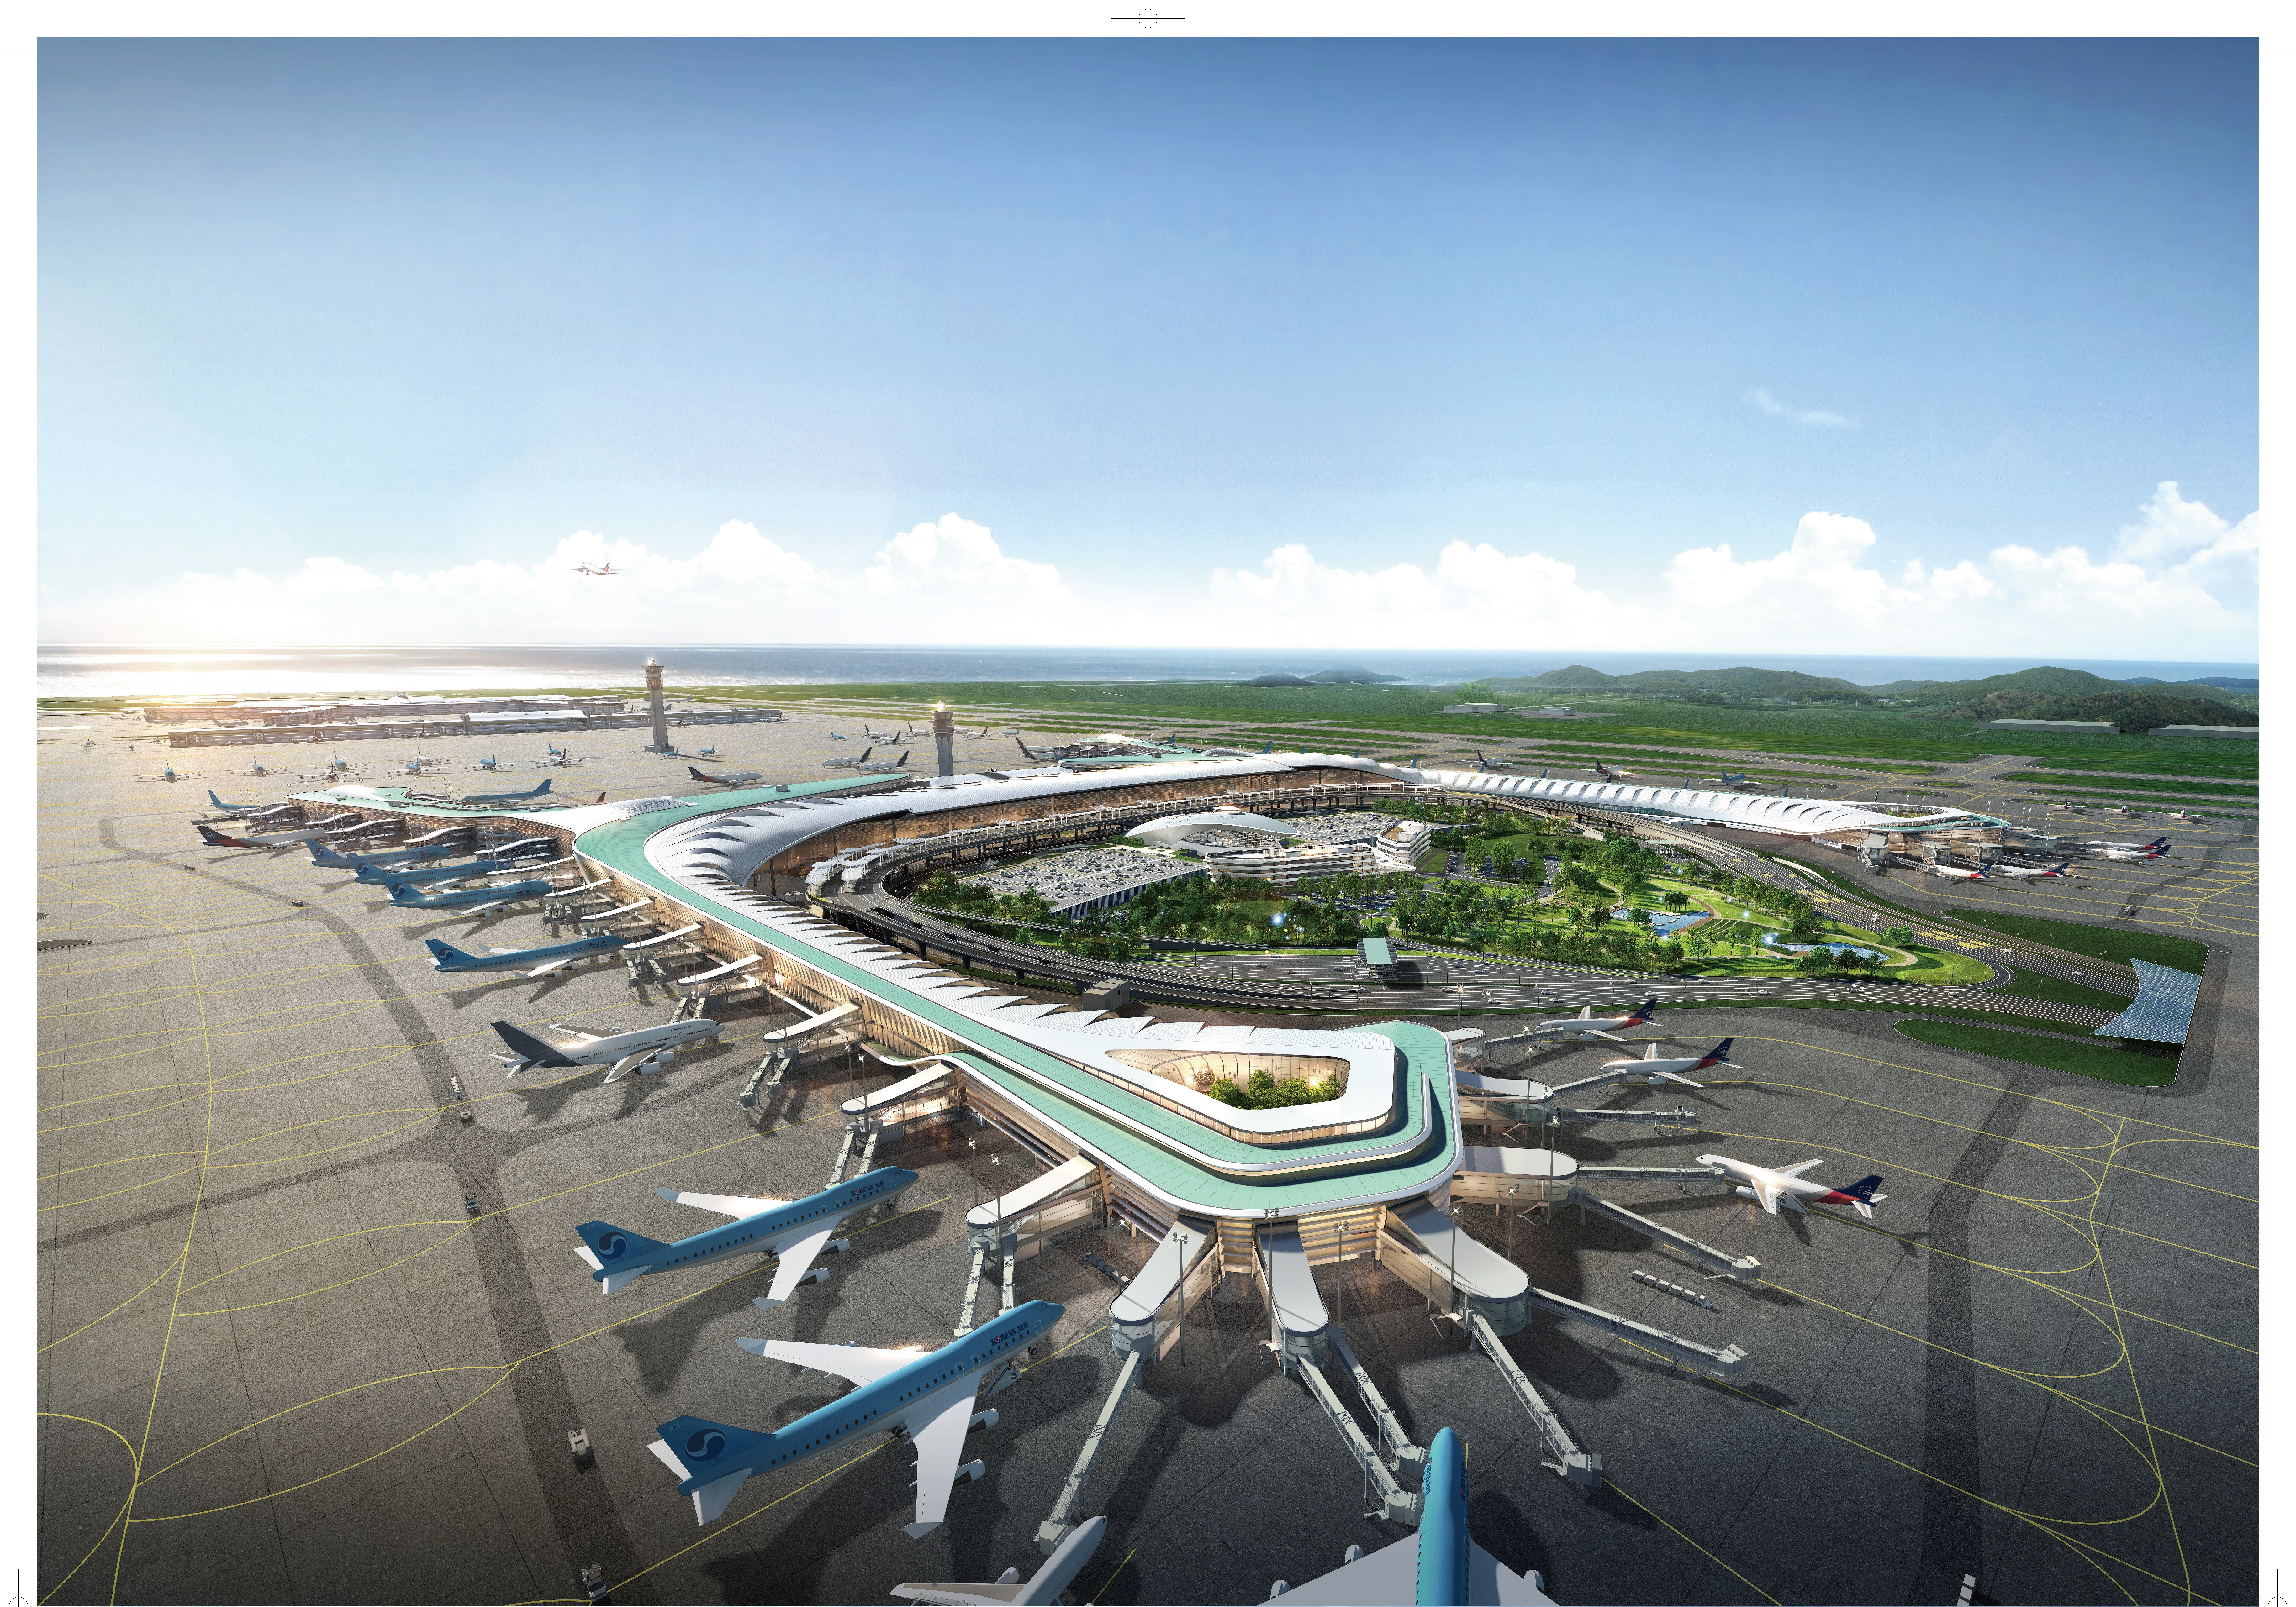 The newly opened Incheon International Airport Terminal 2